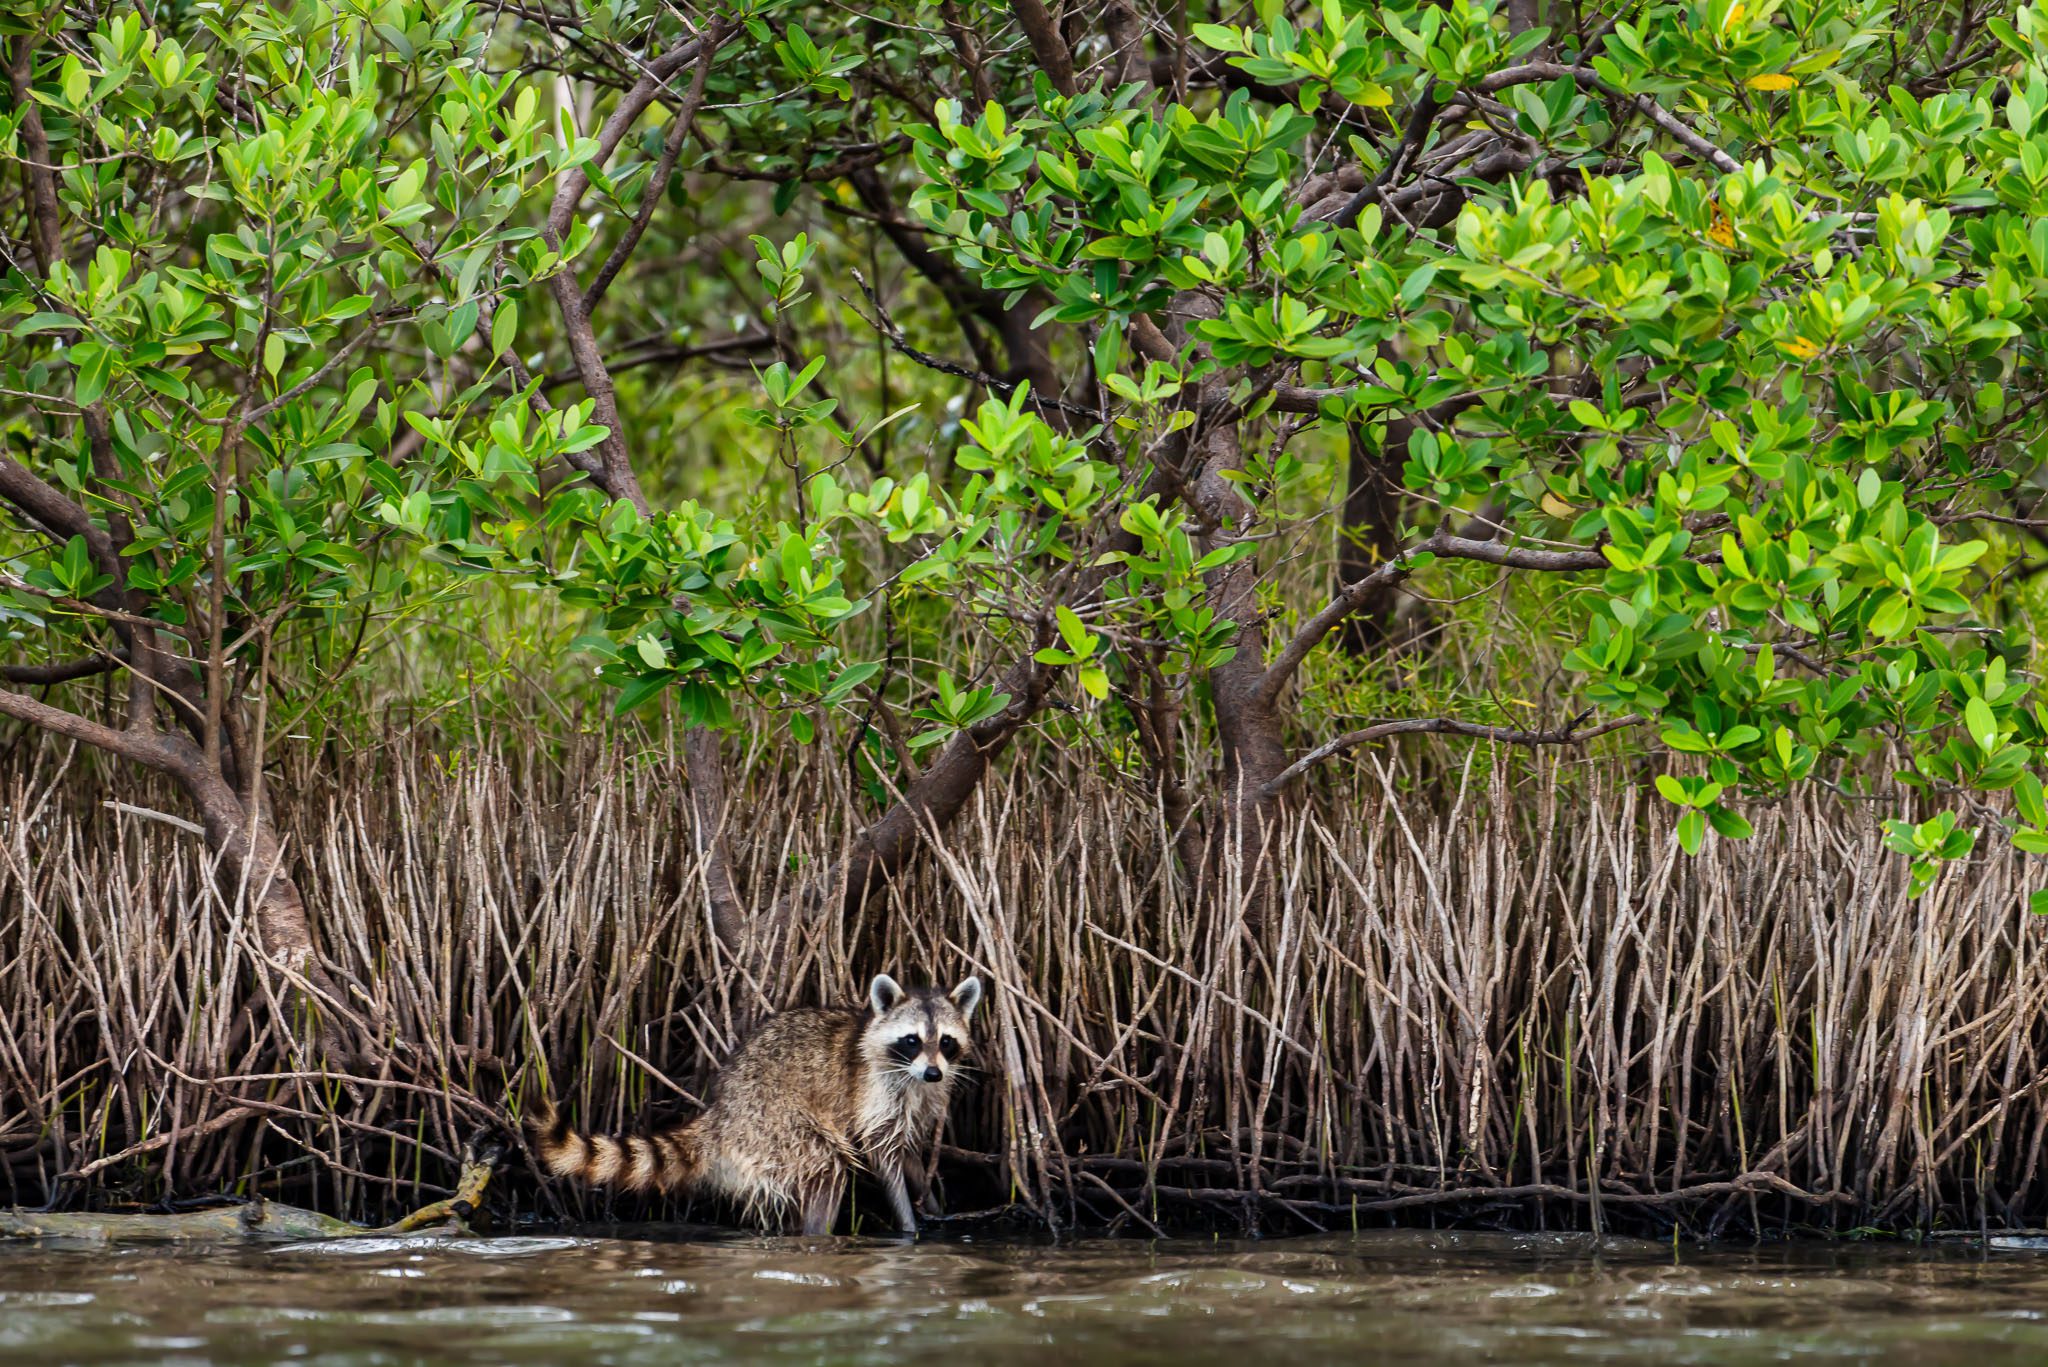 Raccoon in front of Black Mangroves in Canaveral National Seashore.